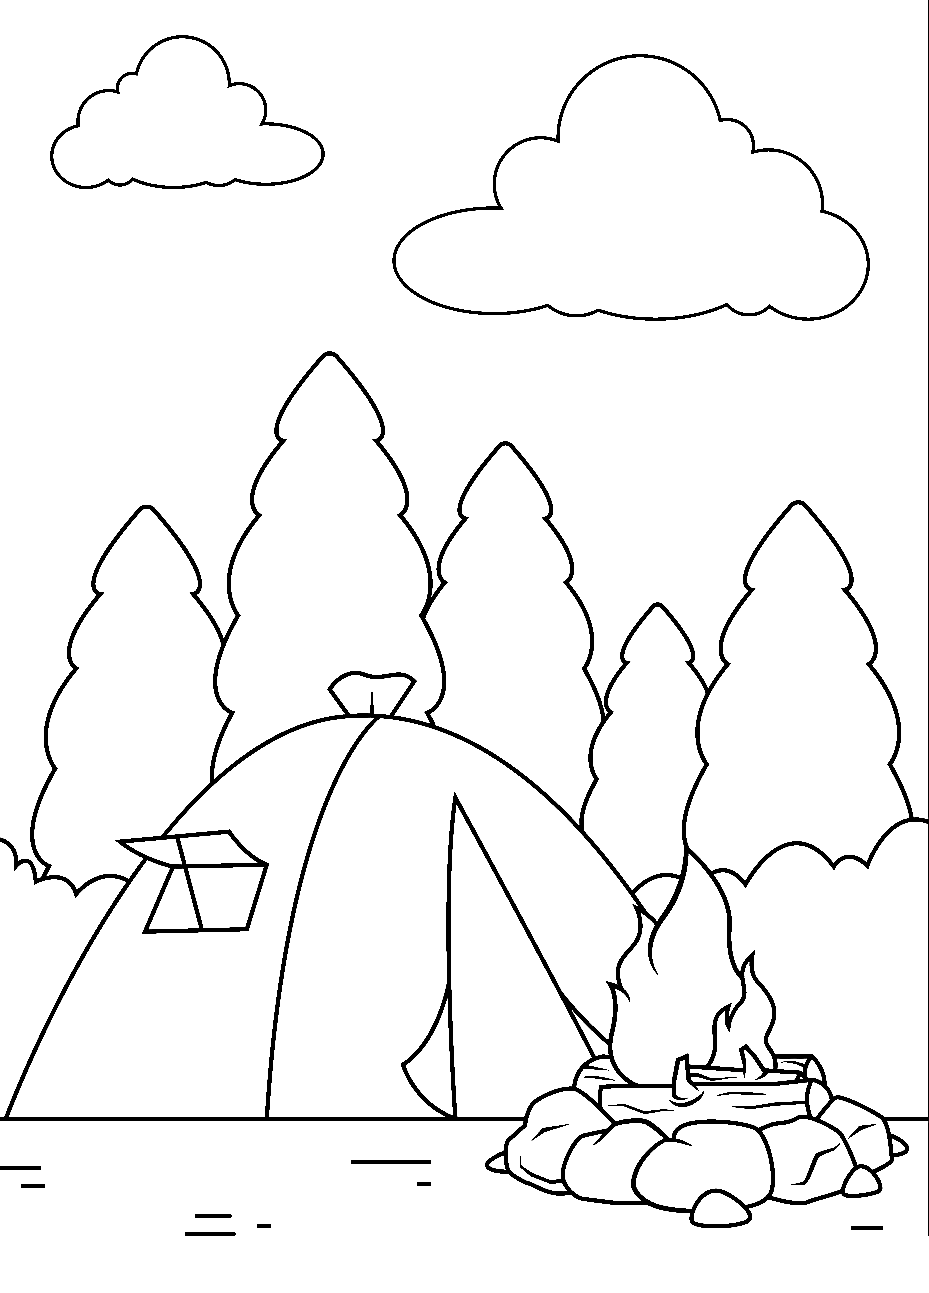 Cozy camping Coloring Page